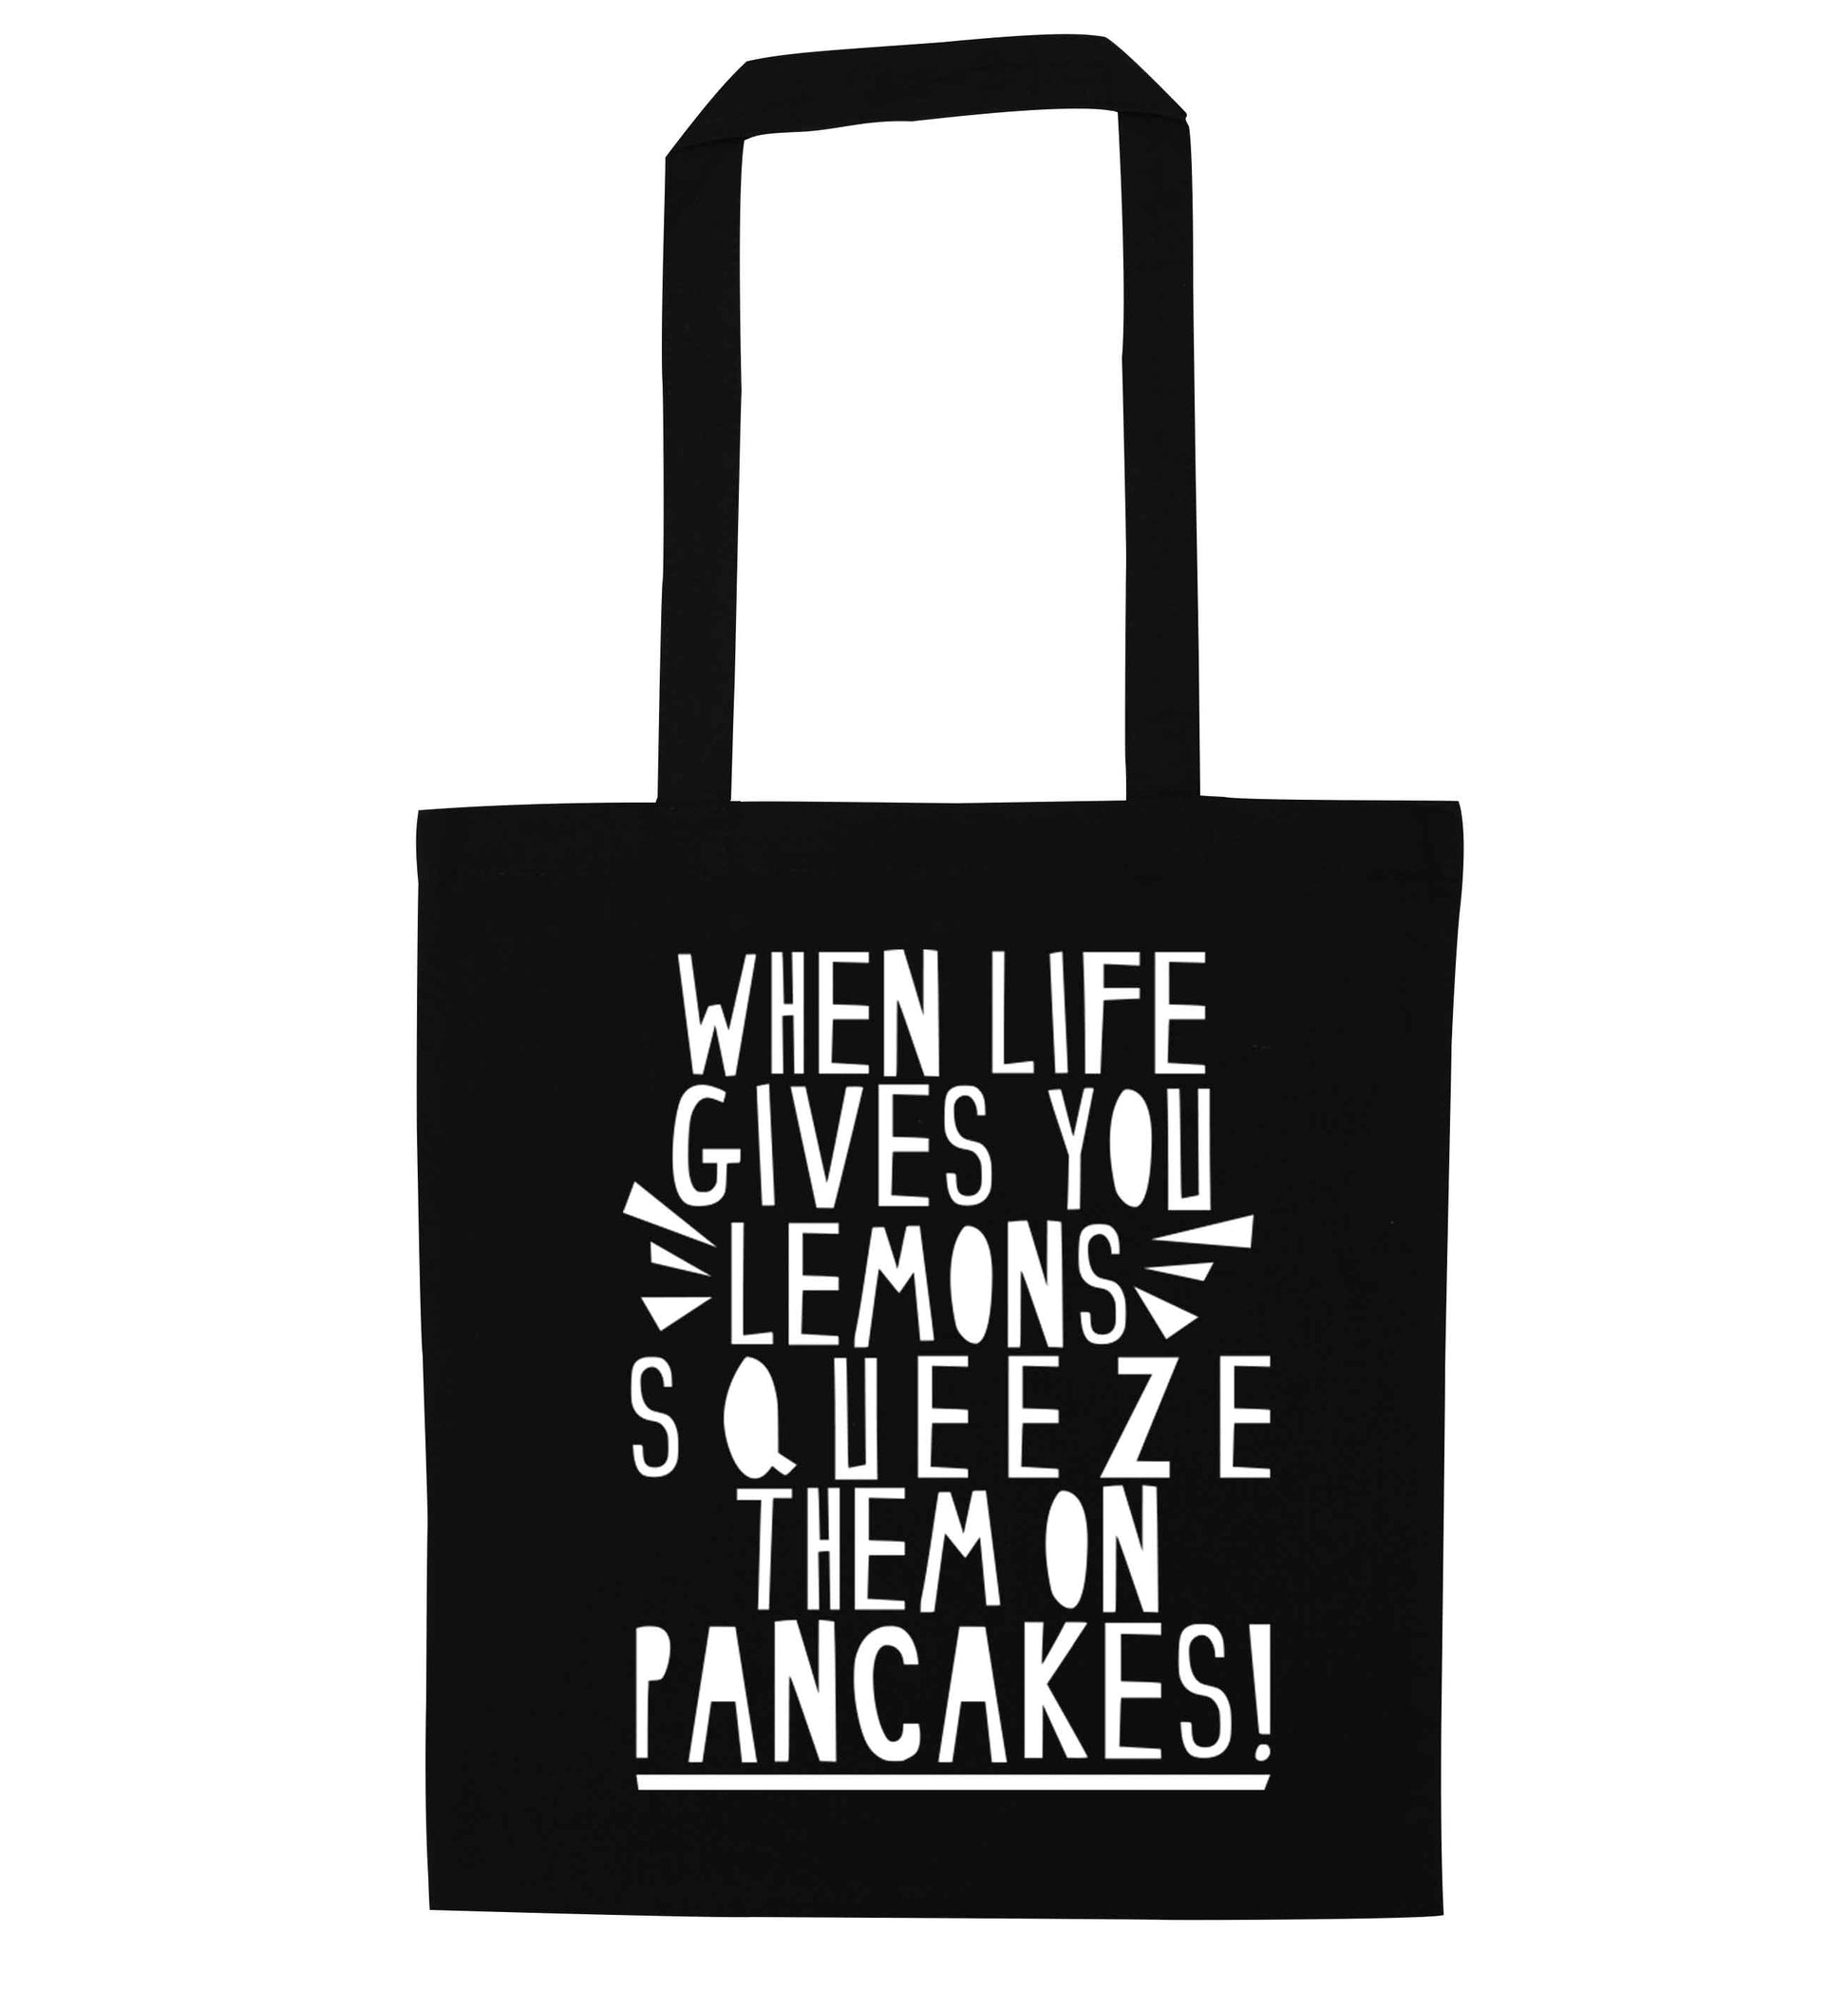 When life gives you lemons squeeze them on pancakes! black tote bag